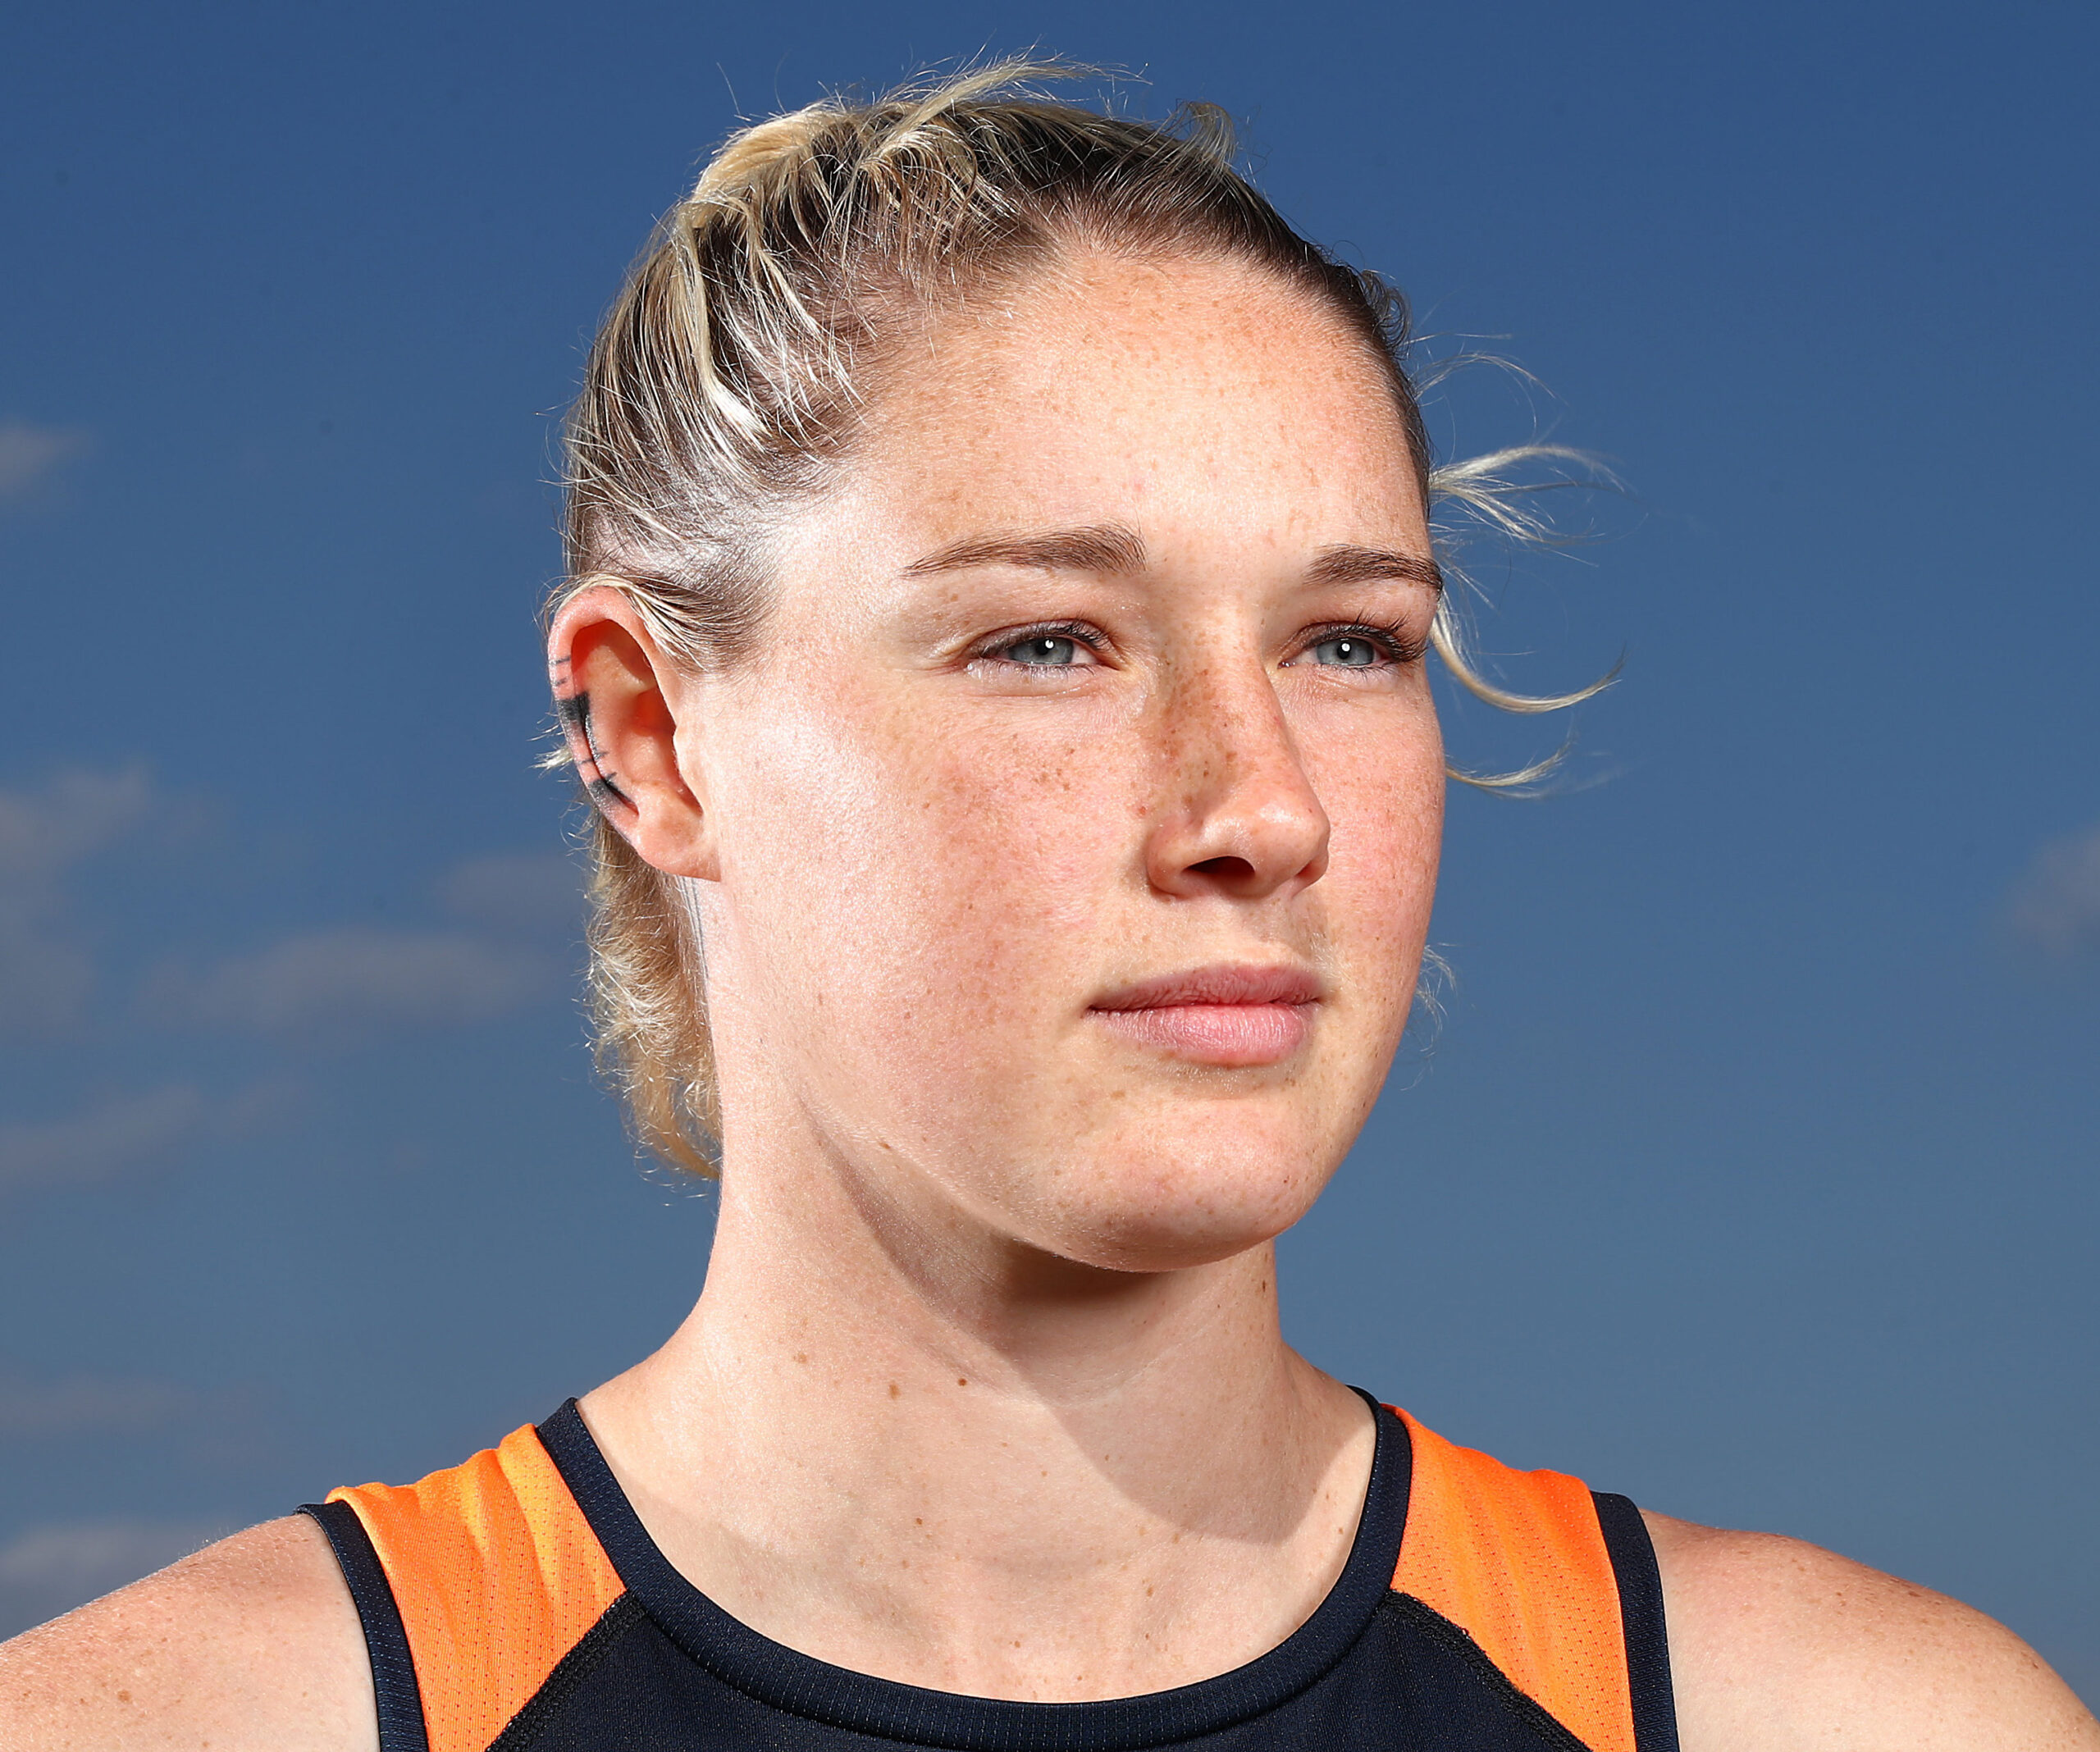 Women to Watch: AWFL star Tayla Harris talks fighting sexism and domestic violence